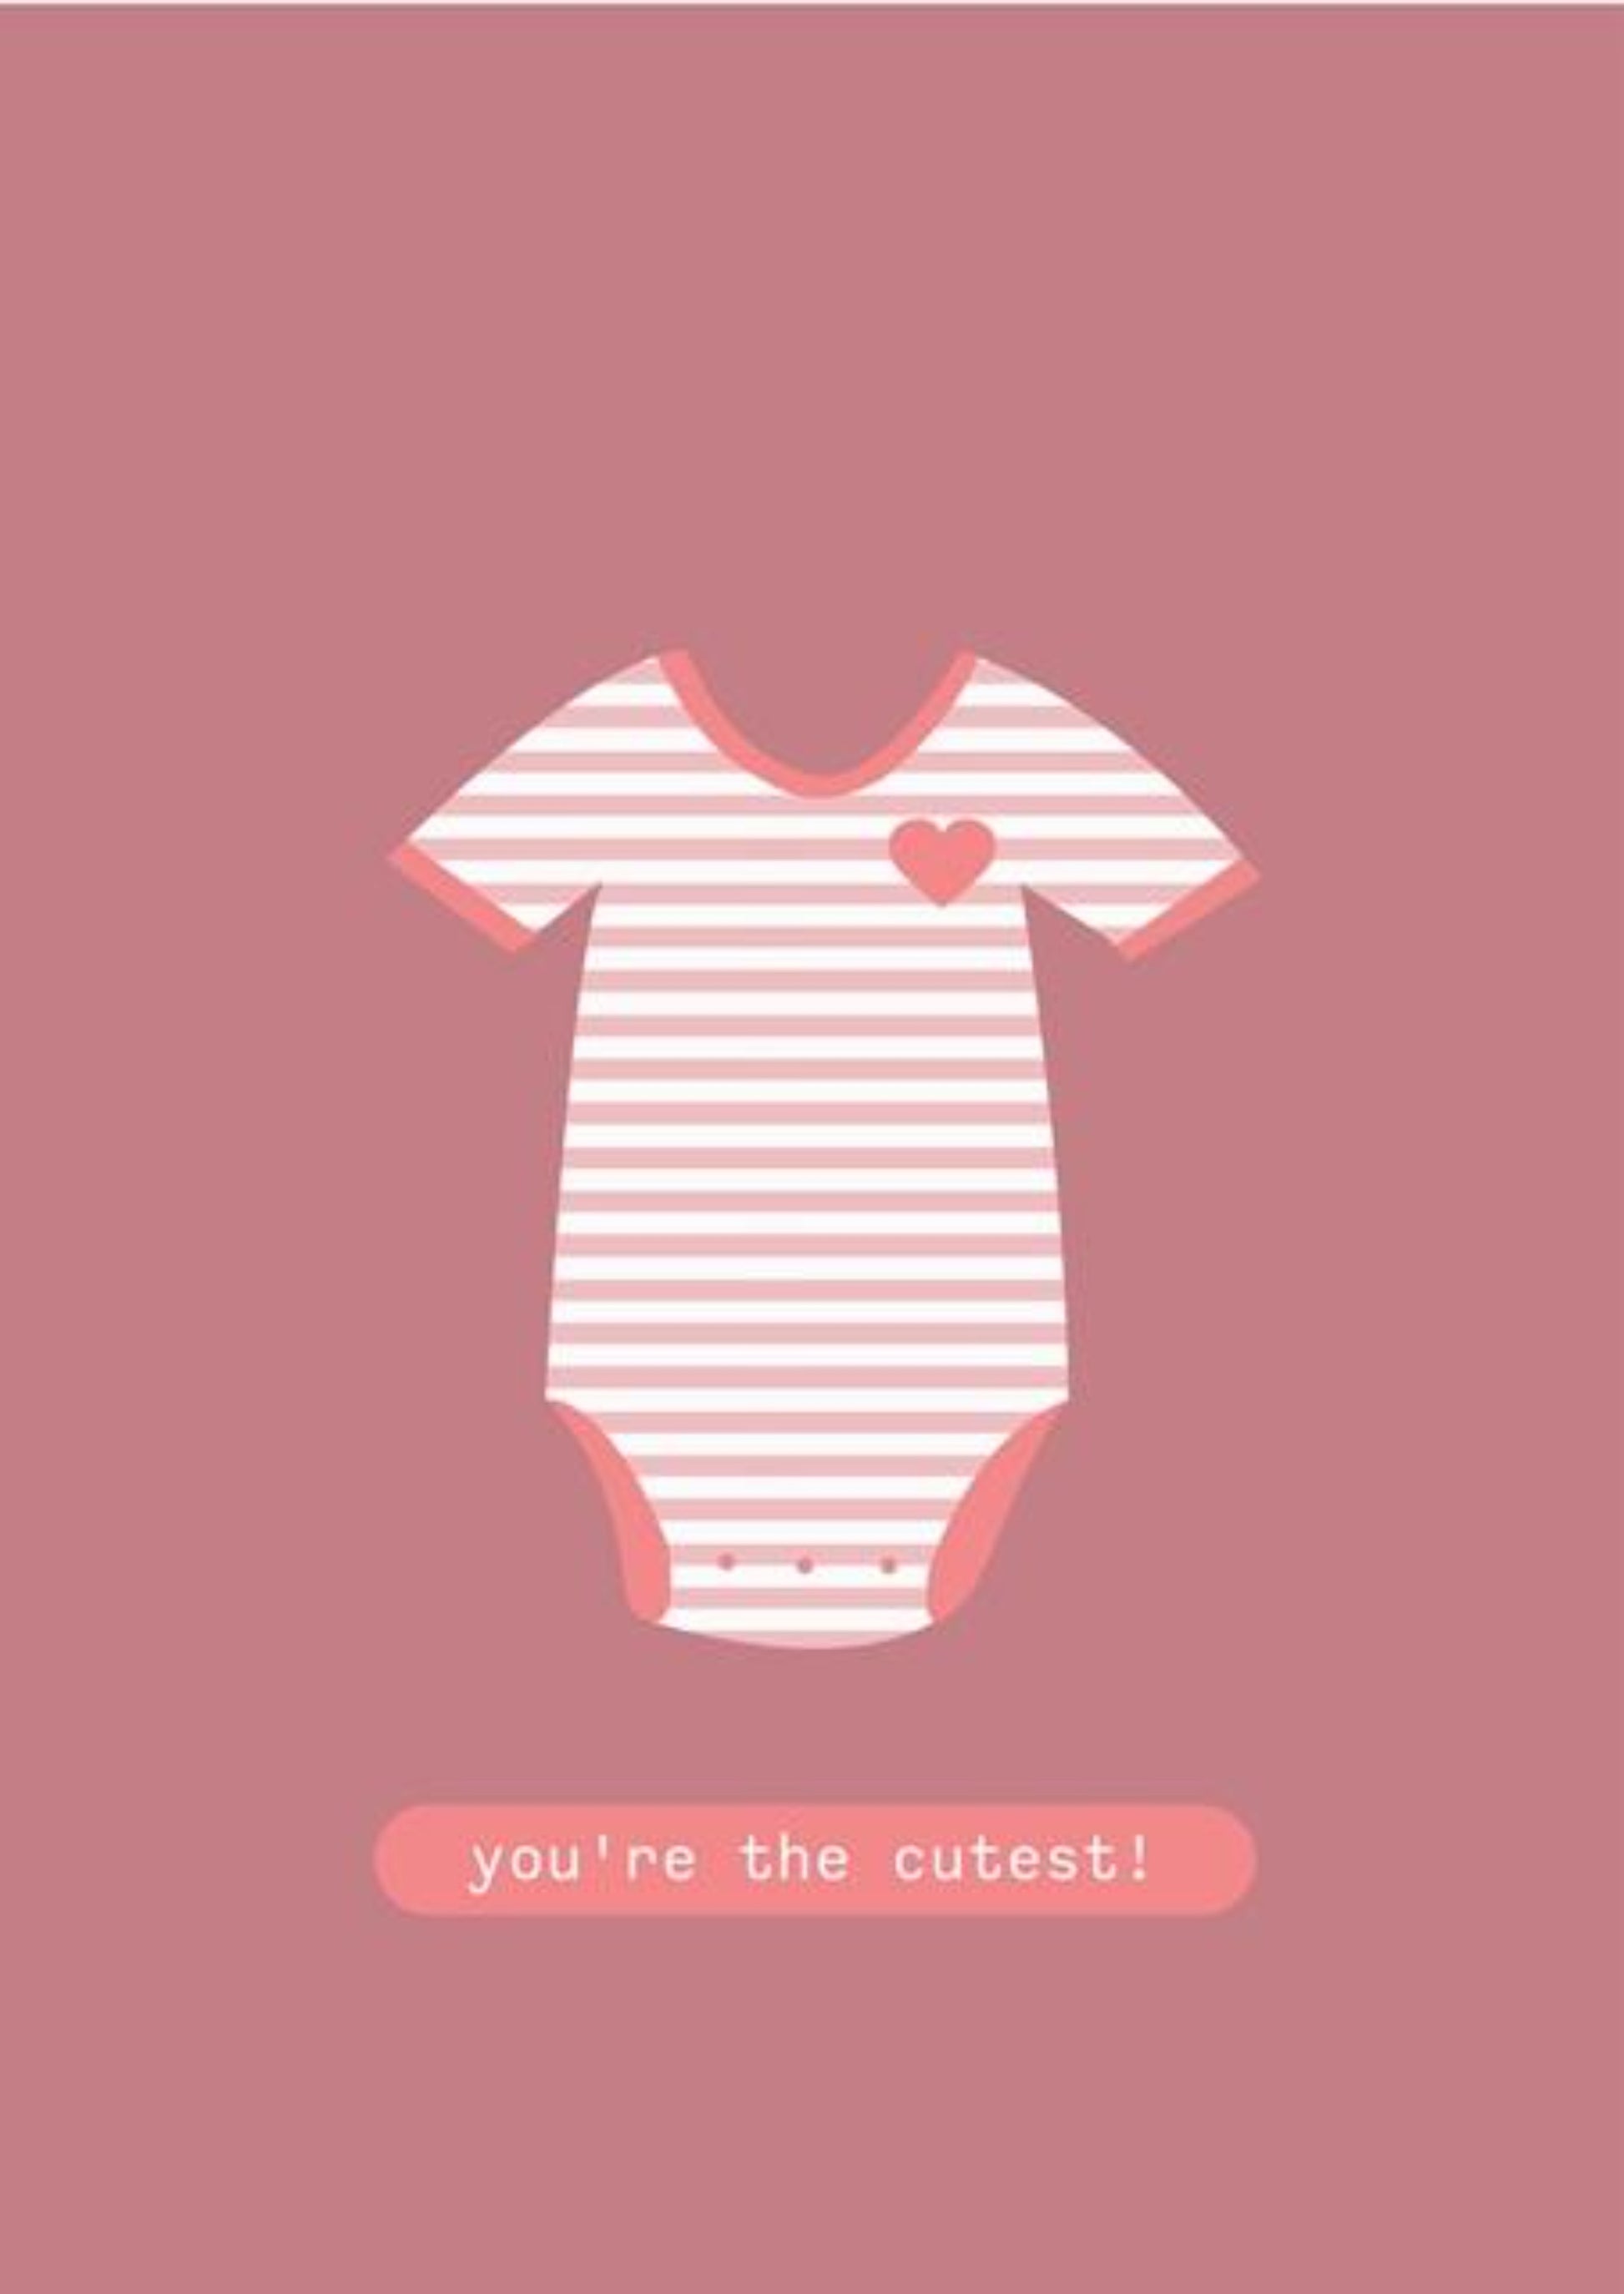 You're the Cutest - New Baby Greeting Card.